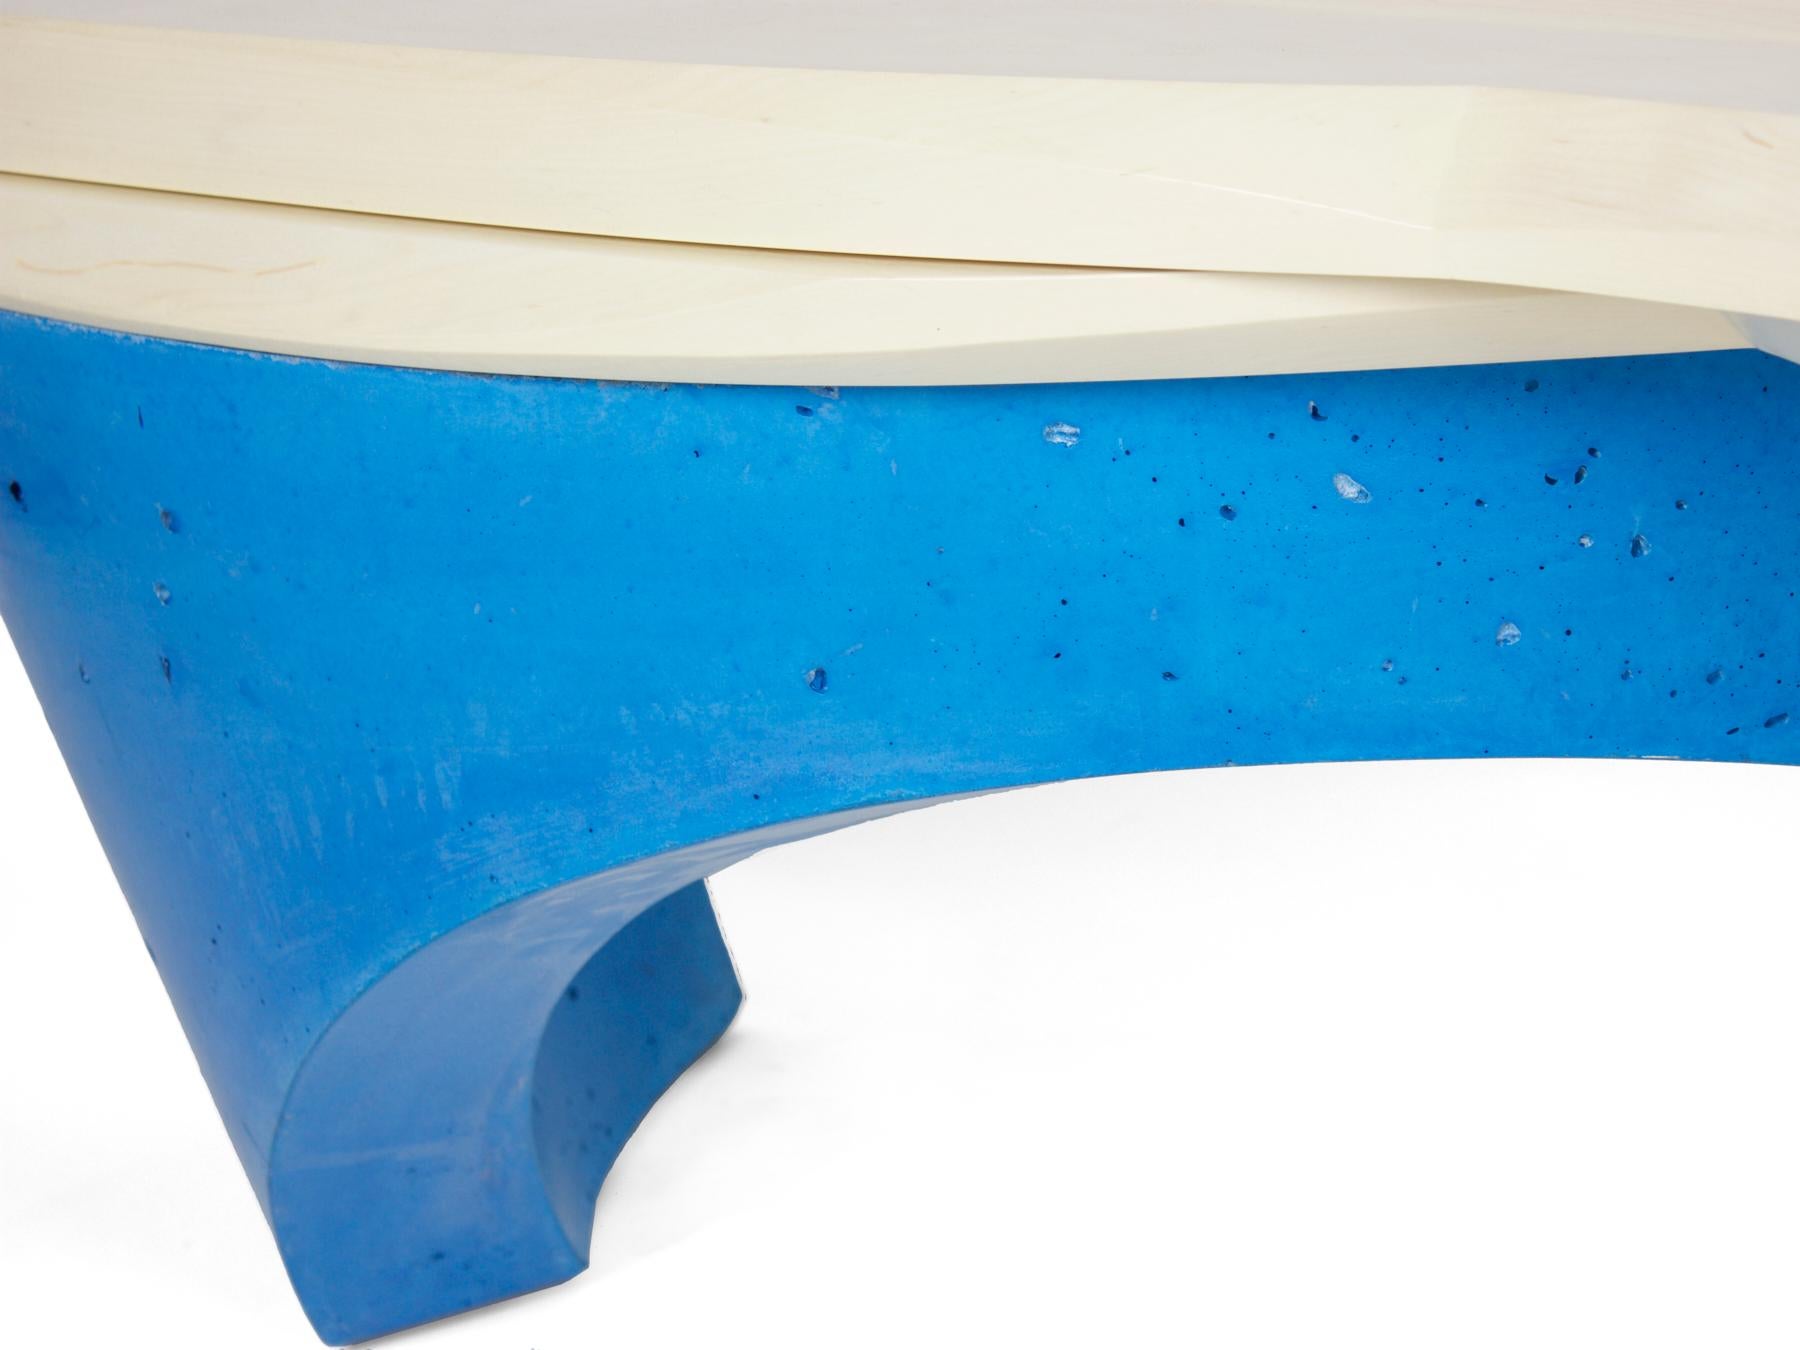 The waves bench is comprised of two curved concrete legs which establish the dynamic movement of the piece. The blue cast concrete legs are pigmented which results in a color that goes all the way through the concrete. The bleached maple seat is